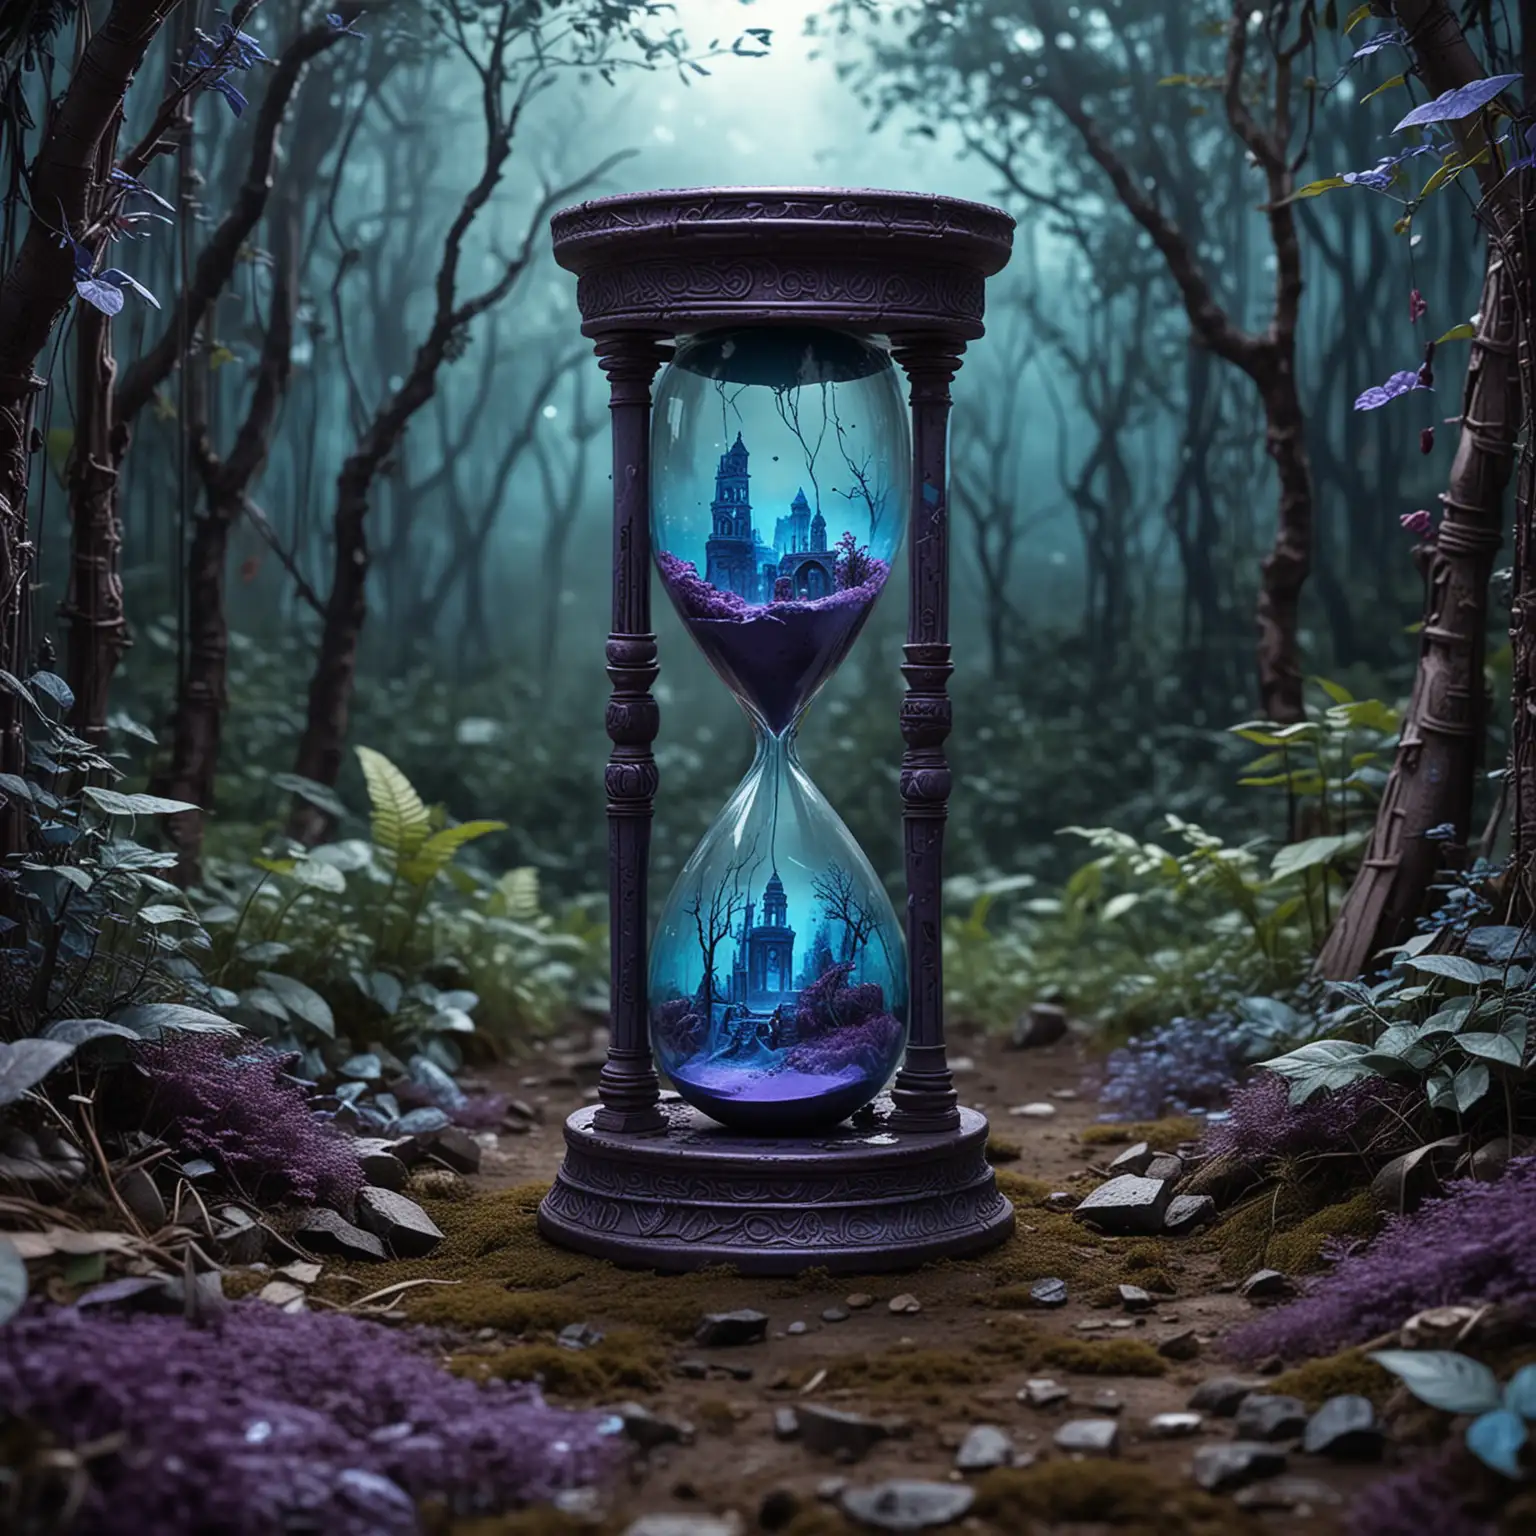 an hourglass with a ruined city inside of half of it and an advanced city in the other half. The hourglass is stood in a deep mystical lush blue and purple forest surrounded by lots of foliage. The hourglass is decorated with hieroglyph style markings